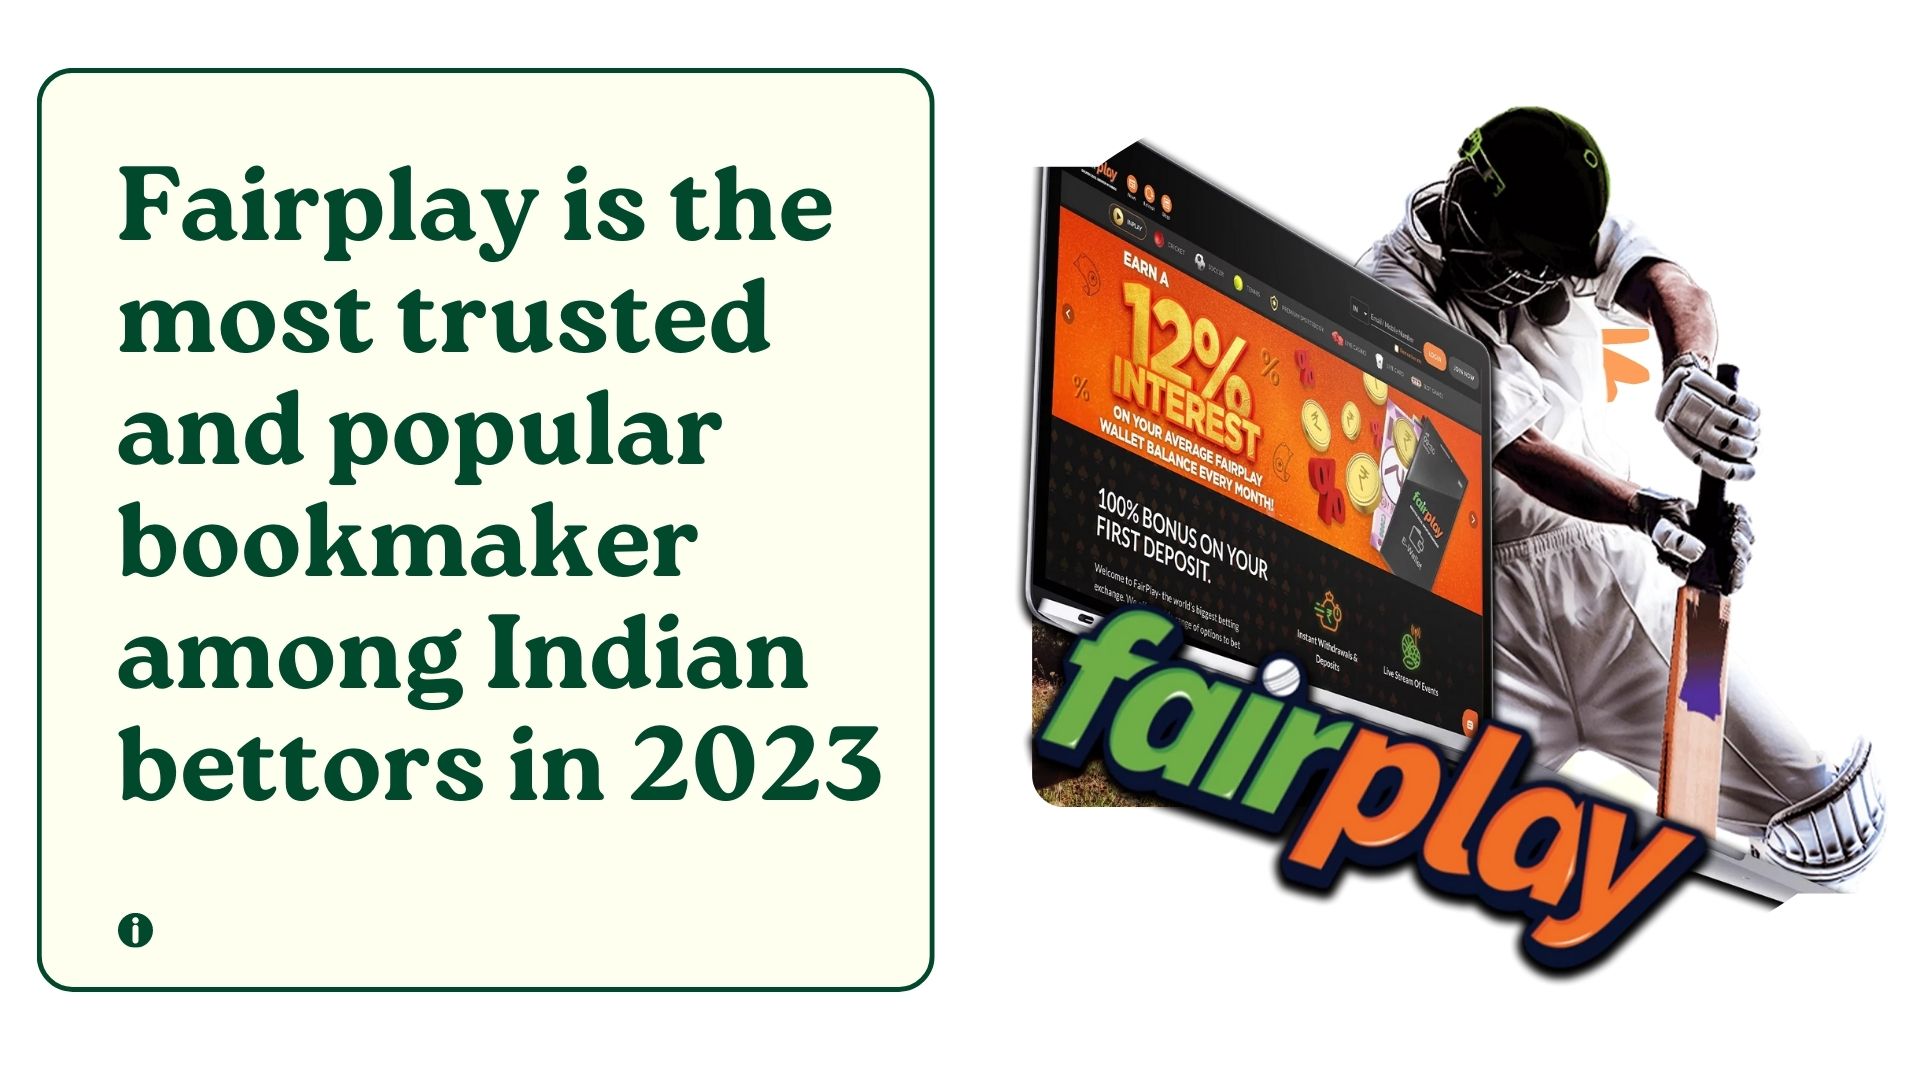 Fairplay - The most trusted and popular bookmaker among Indian bettors in 2023